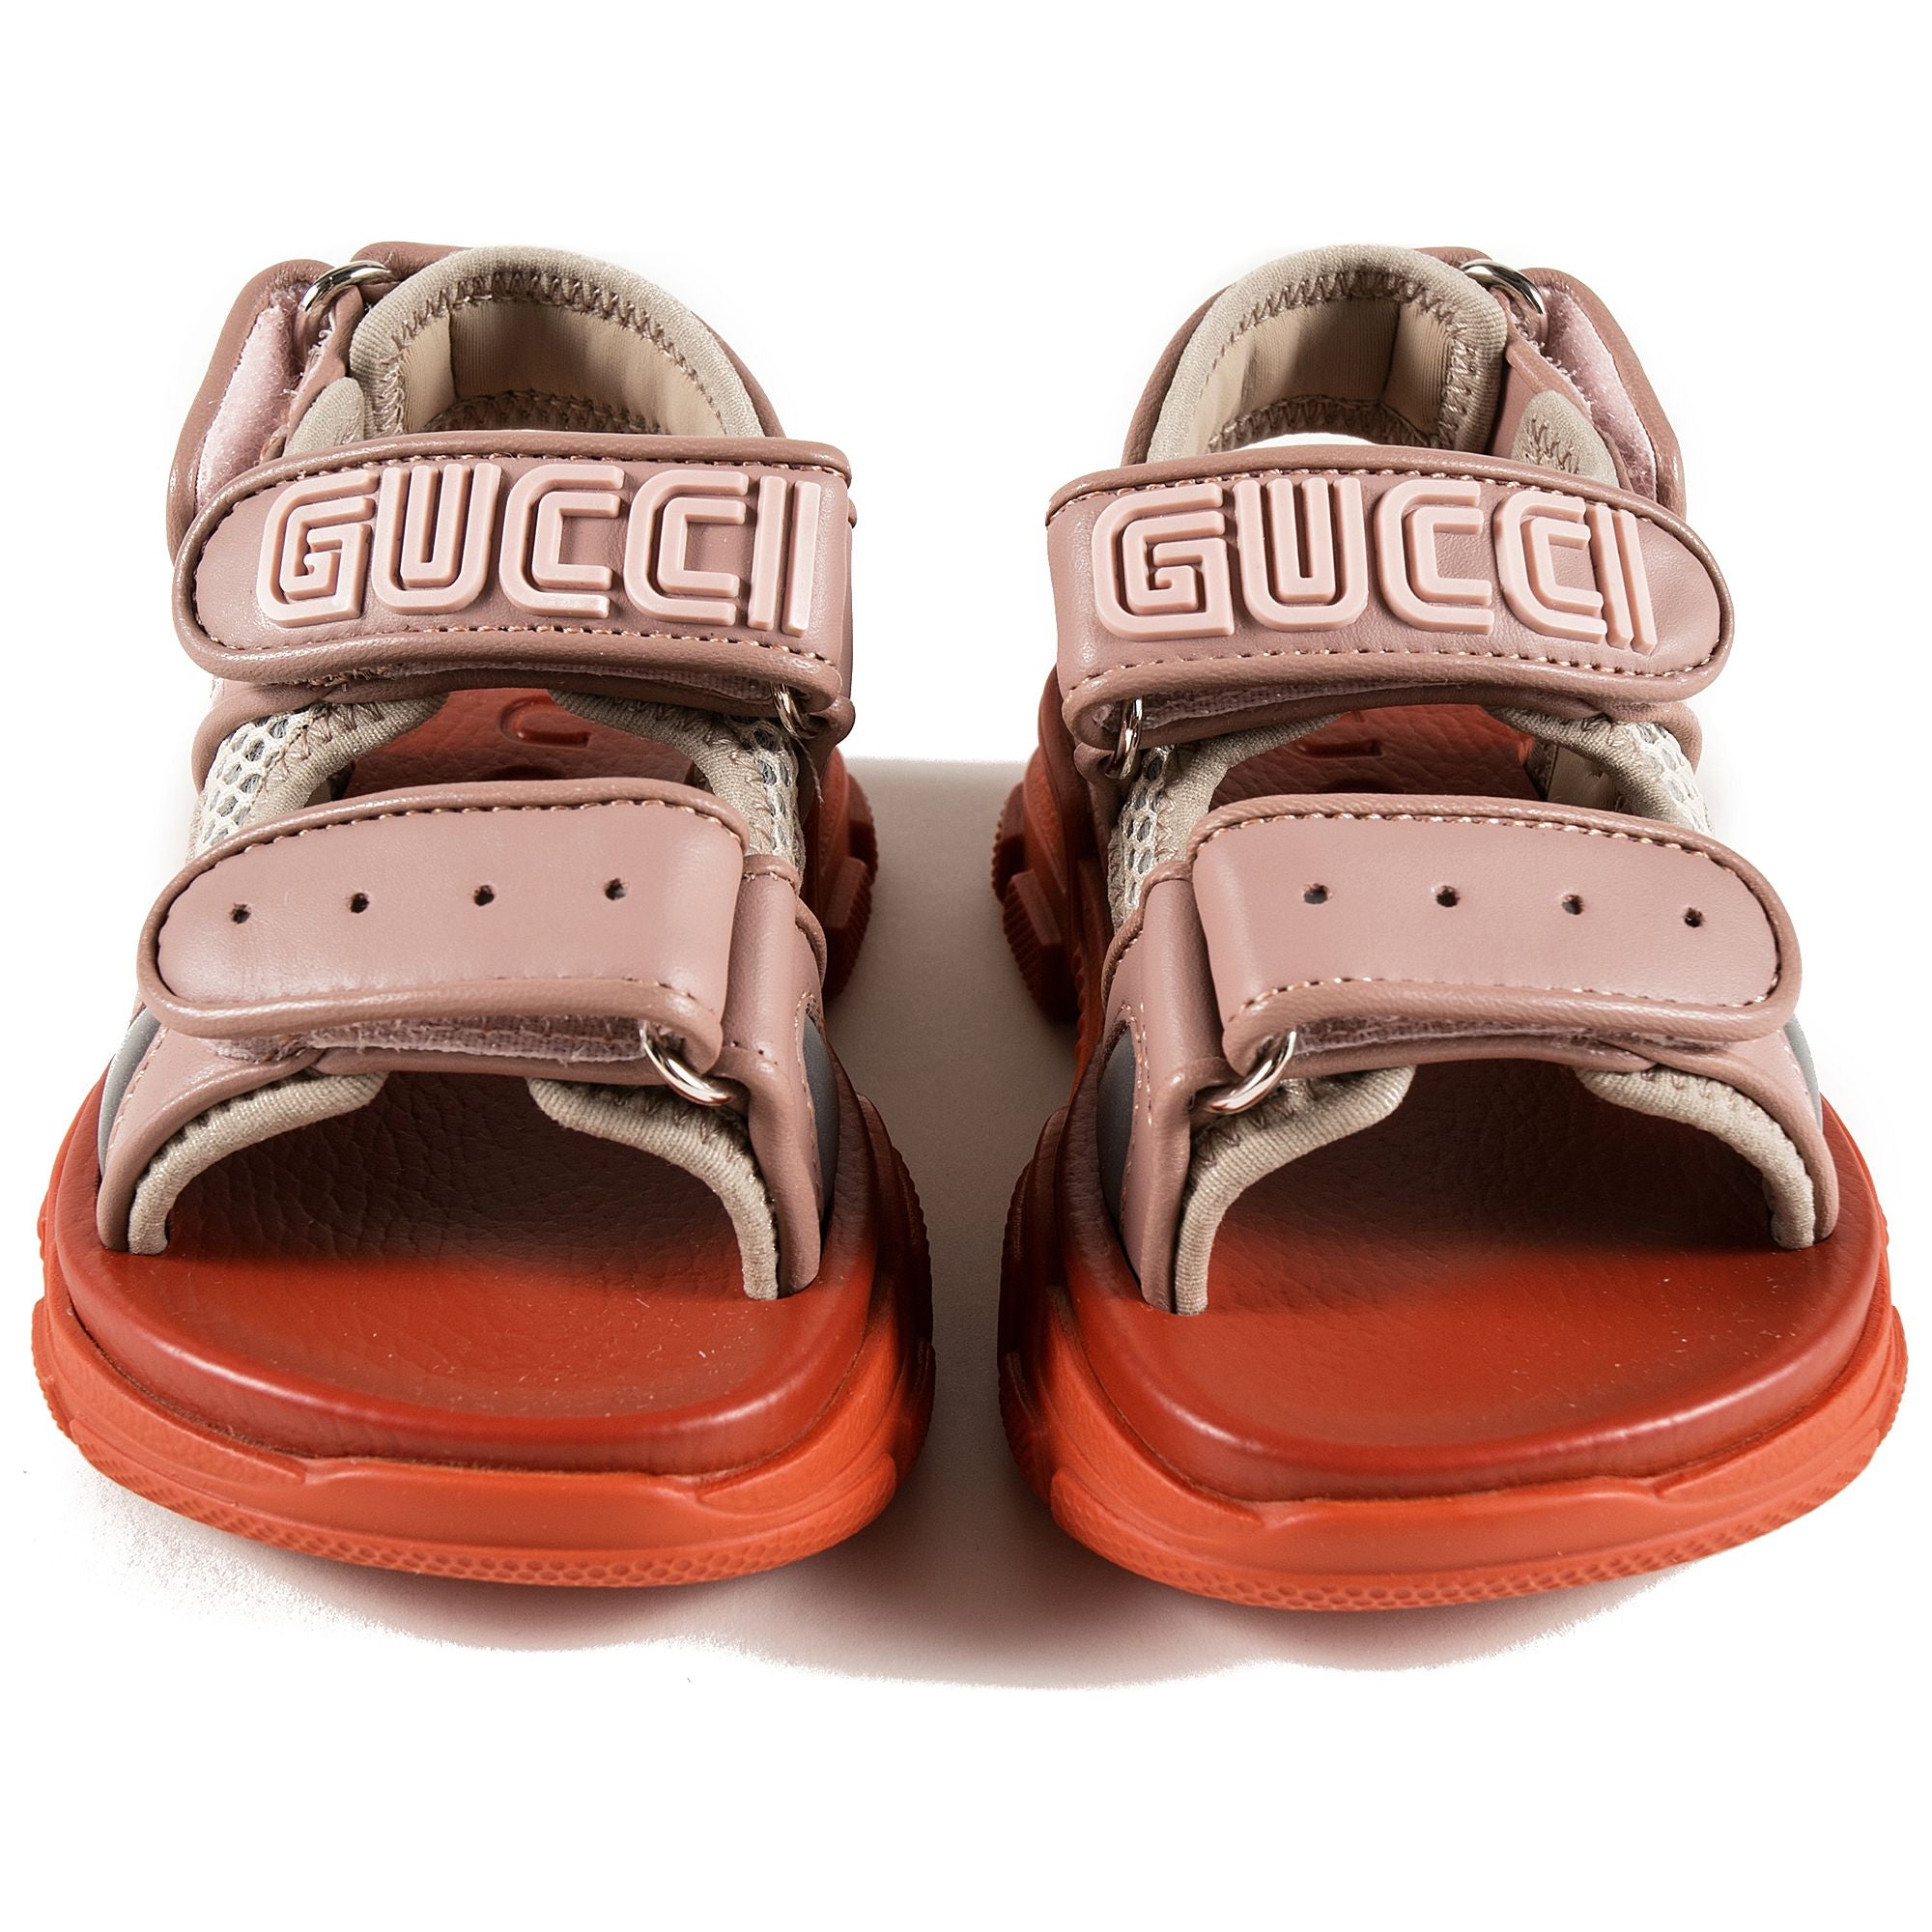 Baby Girls Pink Logo Leather Sandals